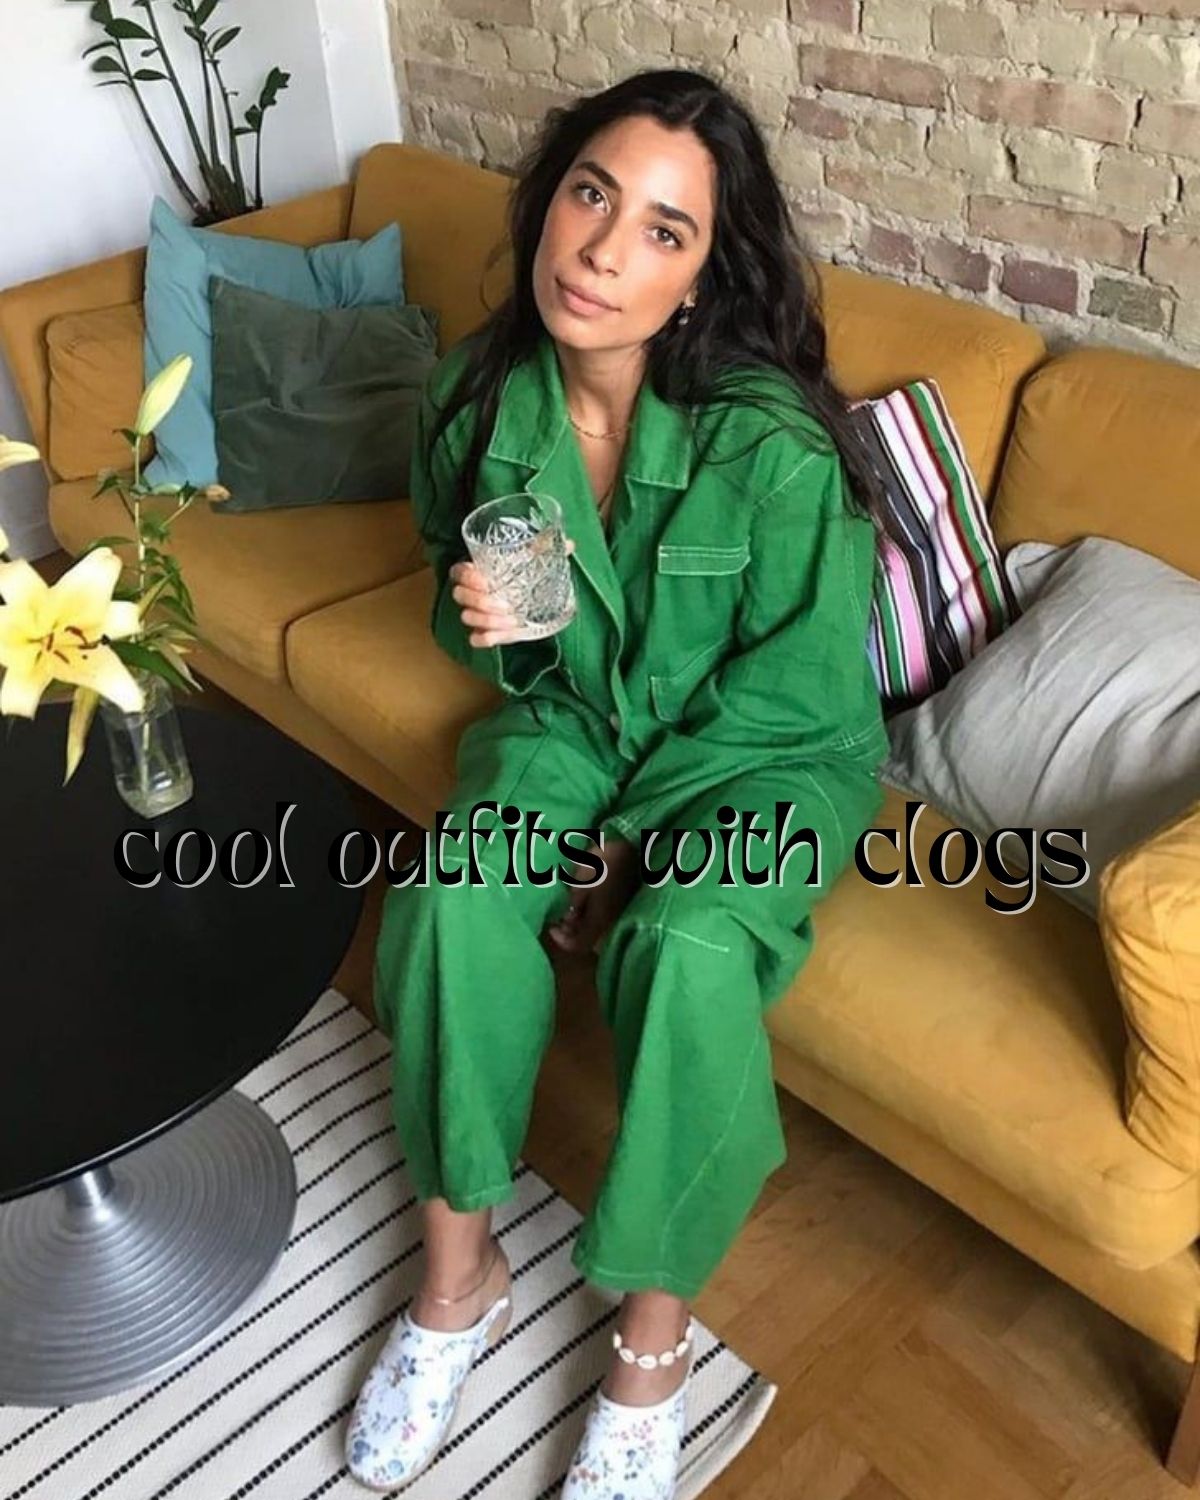 A girl in a green suiting with floral clogs, sitting on a couch